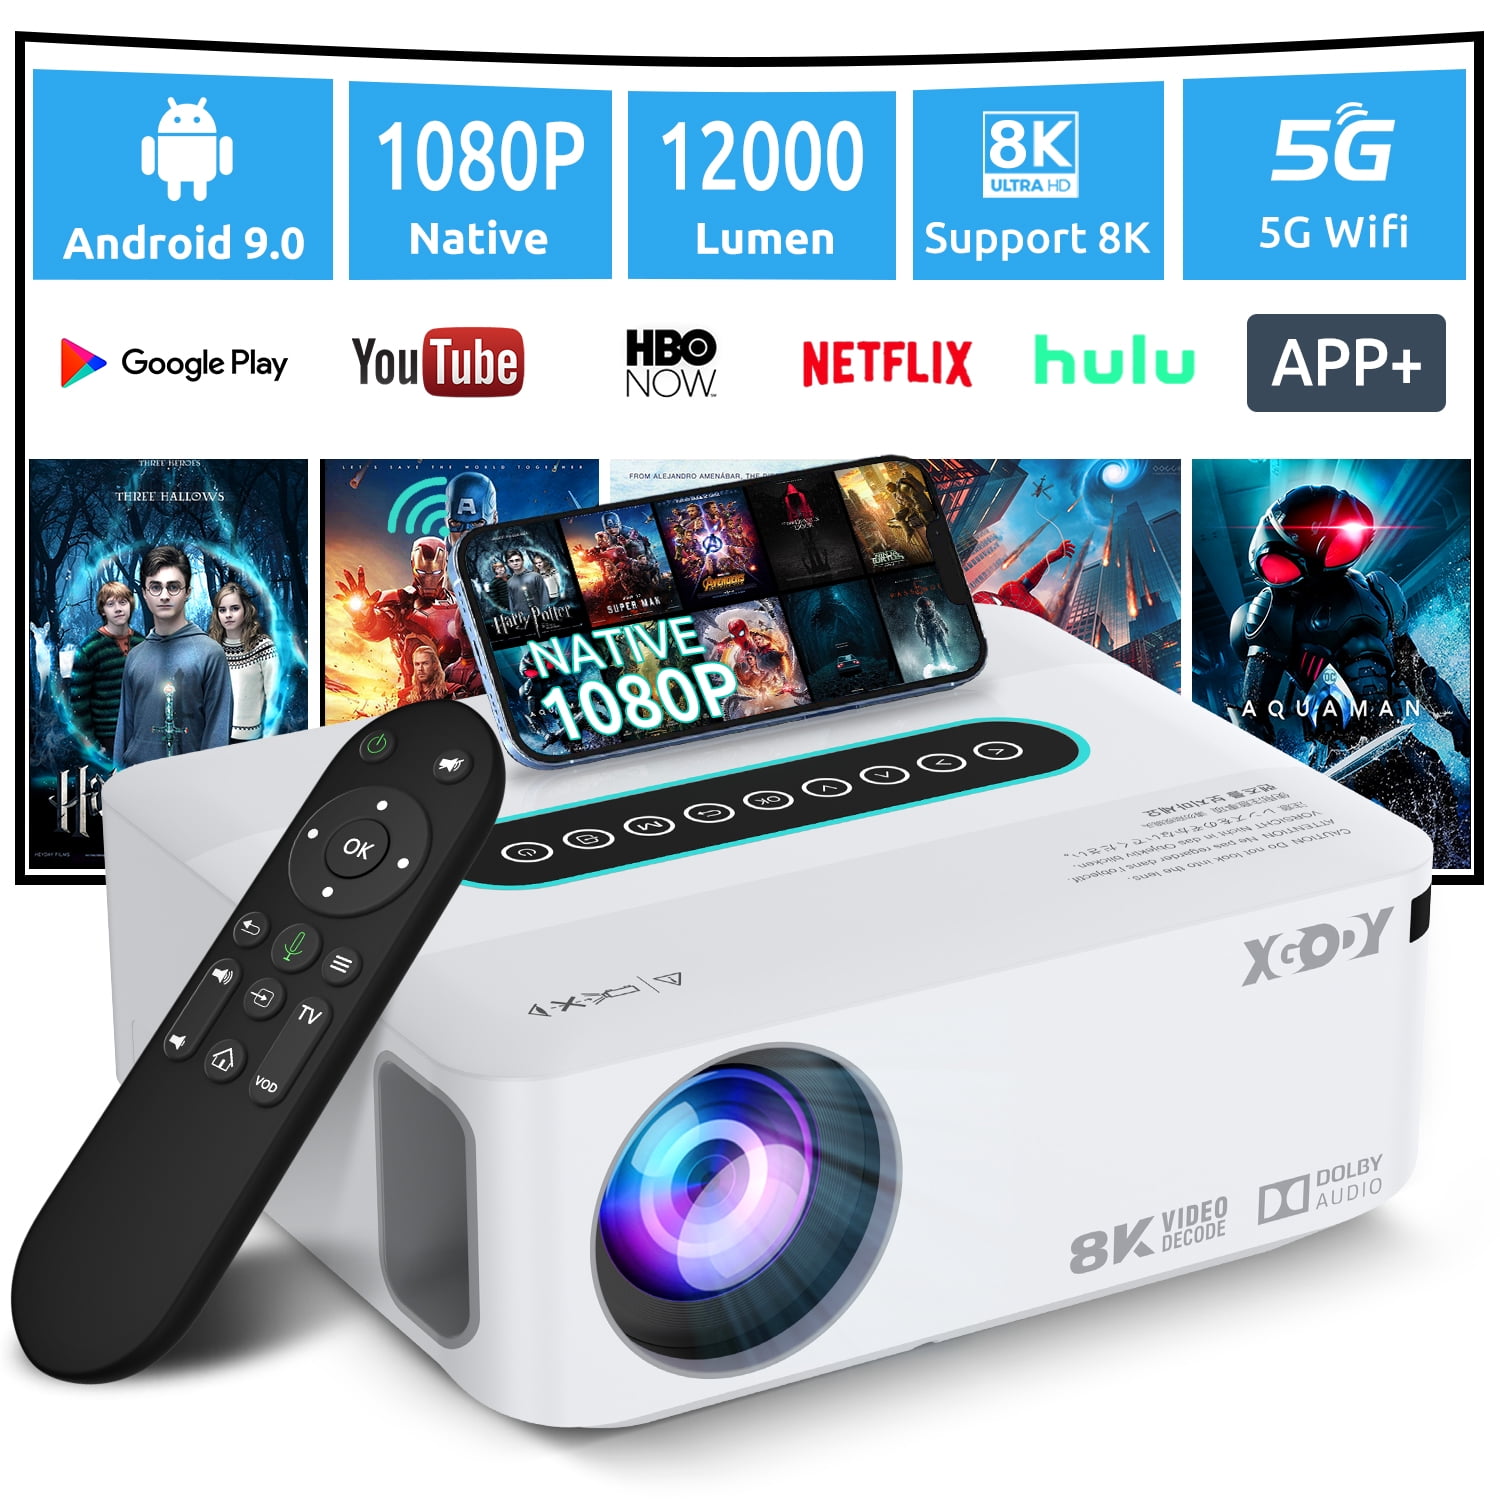 Android TV 9.0 Smart Projector,4k with WiFi and Bluetooth,Native 1080P Movie Projector Outdoor,Xgody X1 Video Projector 4K Supported, Home Theater Projector - Walmart.com